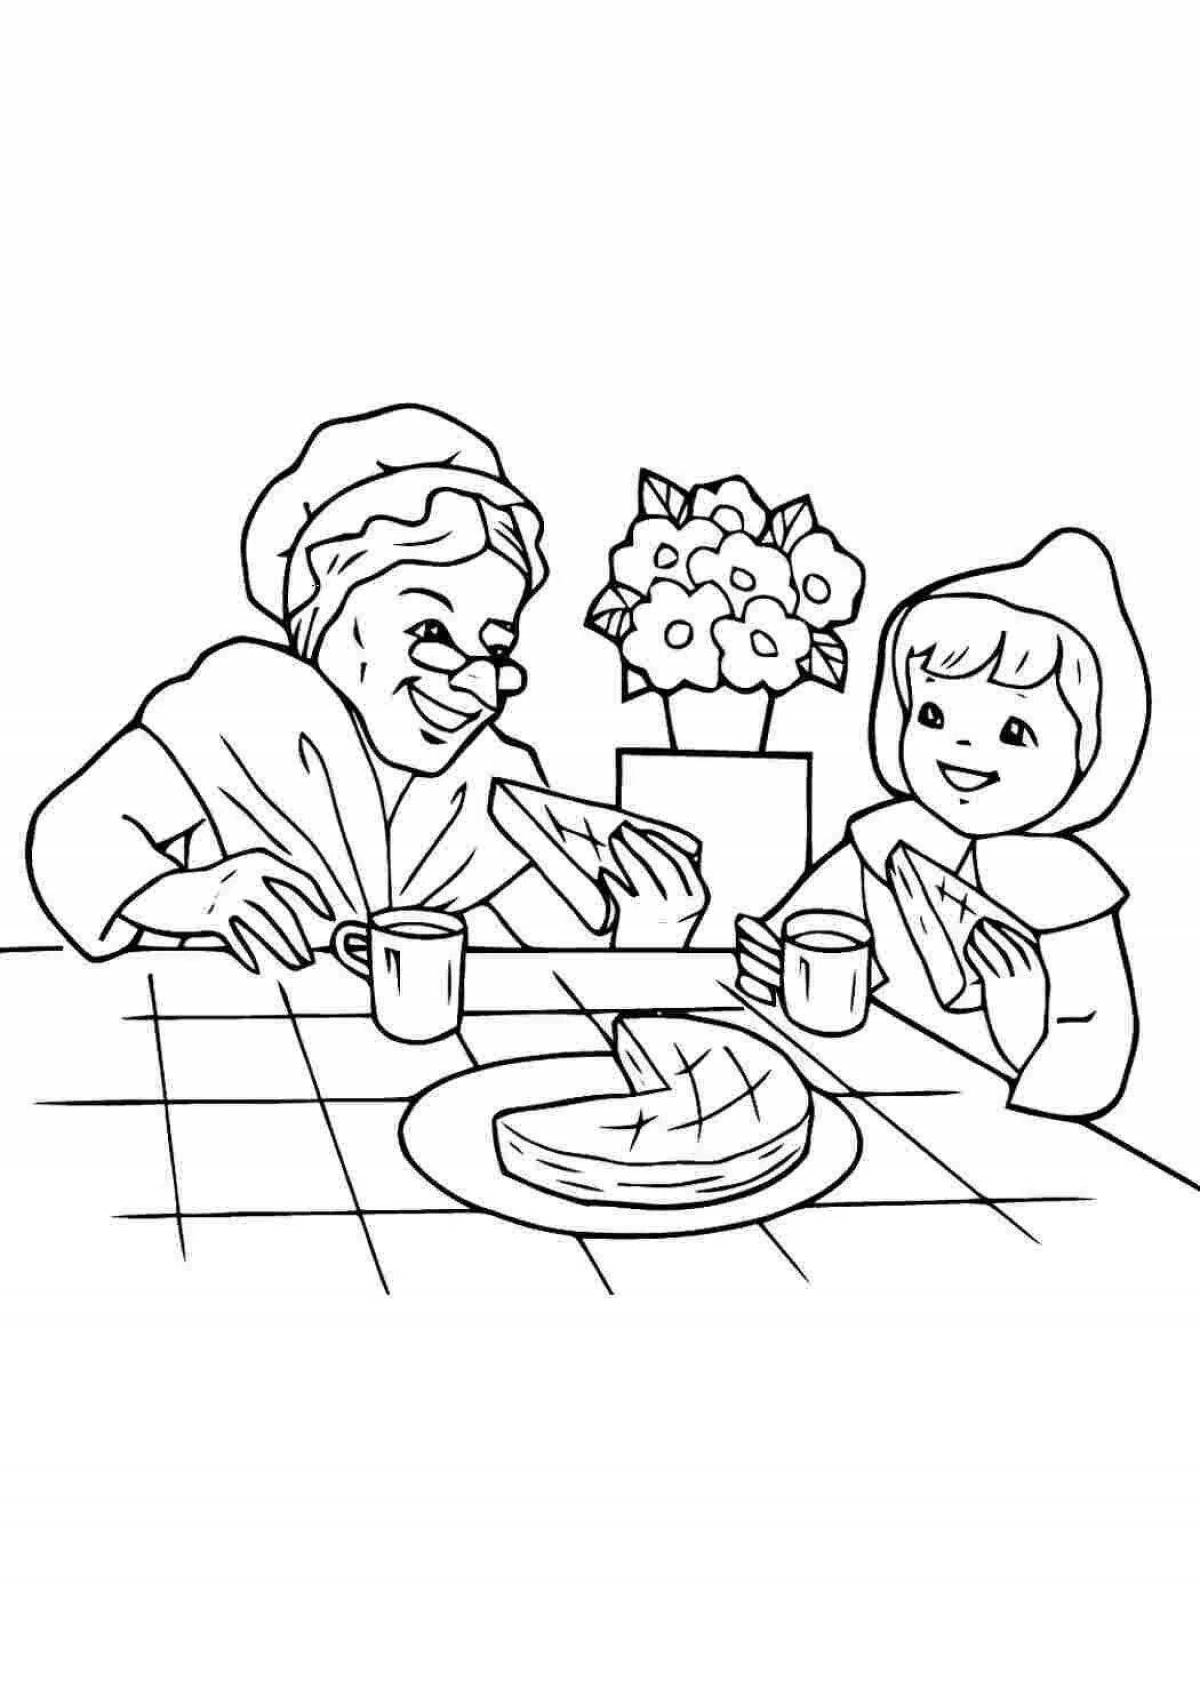 Glorious grandmother and granddaughter coloring